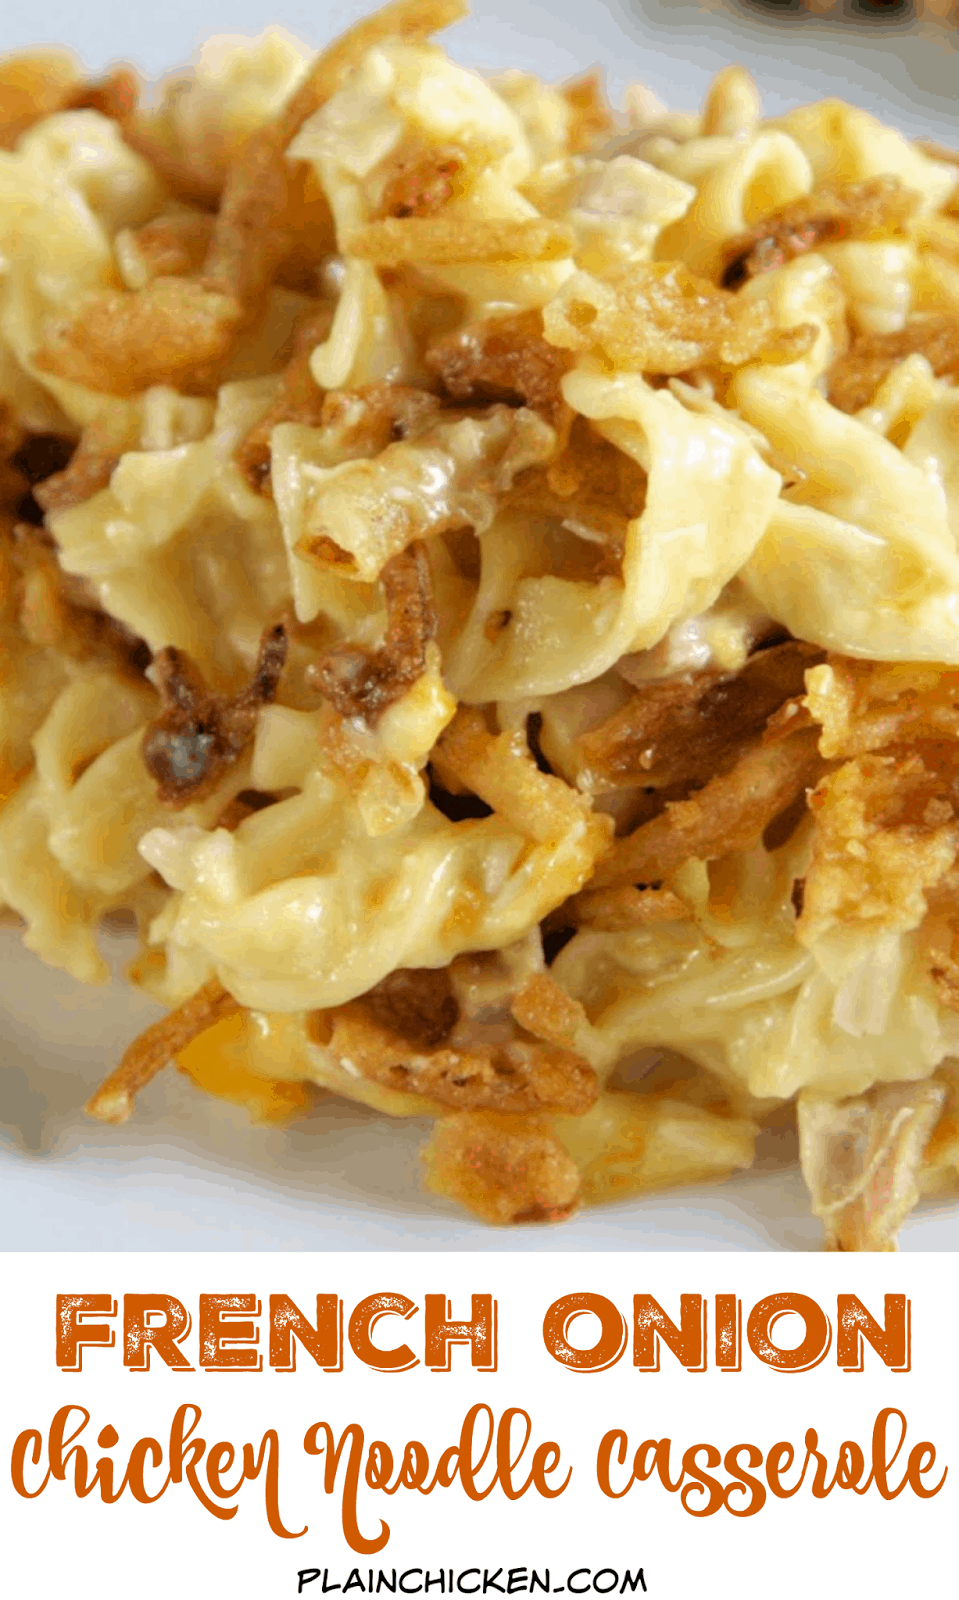 French Onion Chicken Noodle Casserole Recipe - egg noodles, french onion dip, cream of chicken soup, cheese, chicken topped with French fried onions - LOVE this casserole! Can make ahead and freezer for later. You can even split it between two foil pans - one for now and one for the freezer. Super easy main dish with only 6 ingredients that tastes great! Everyone RAVES about this casserole!